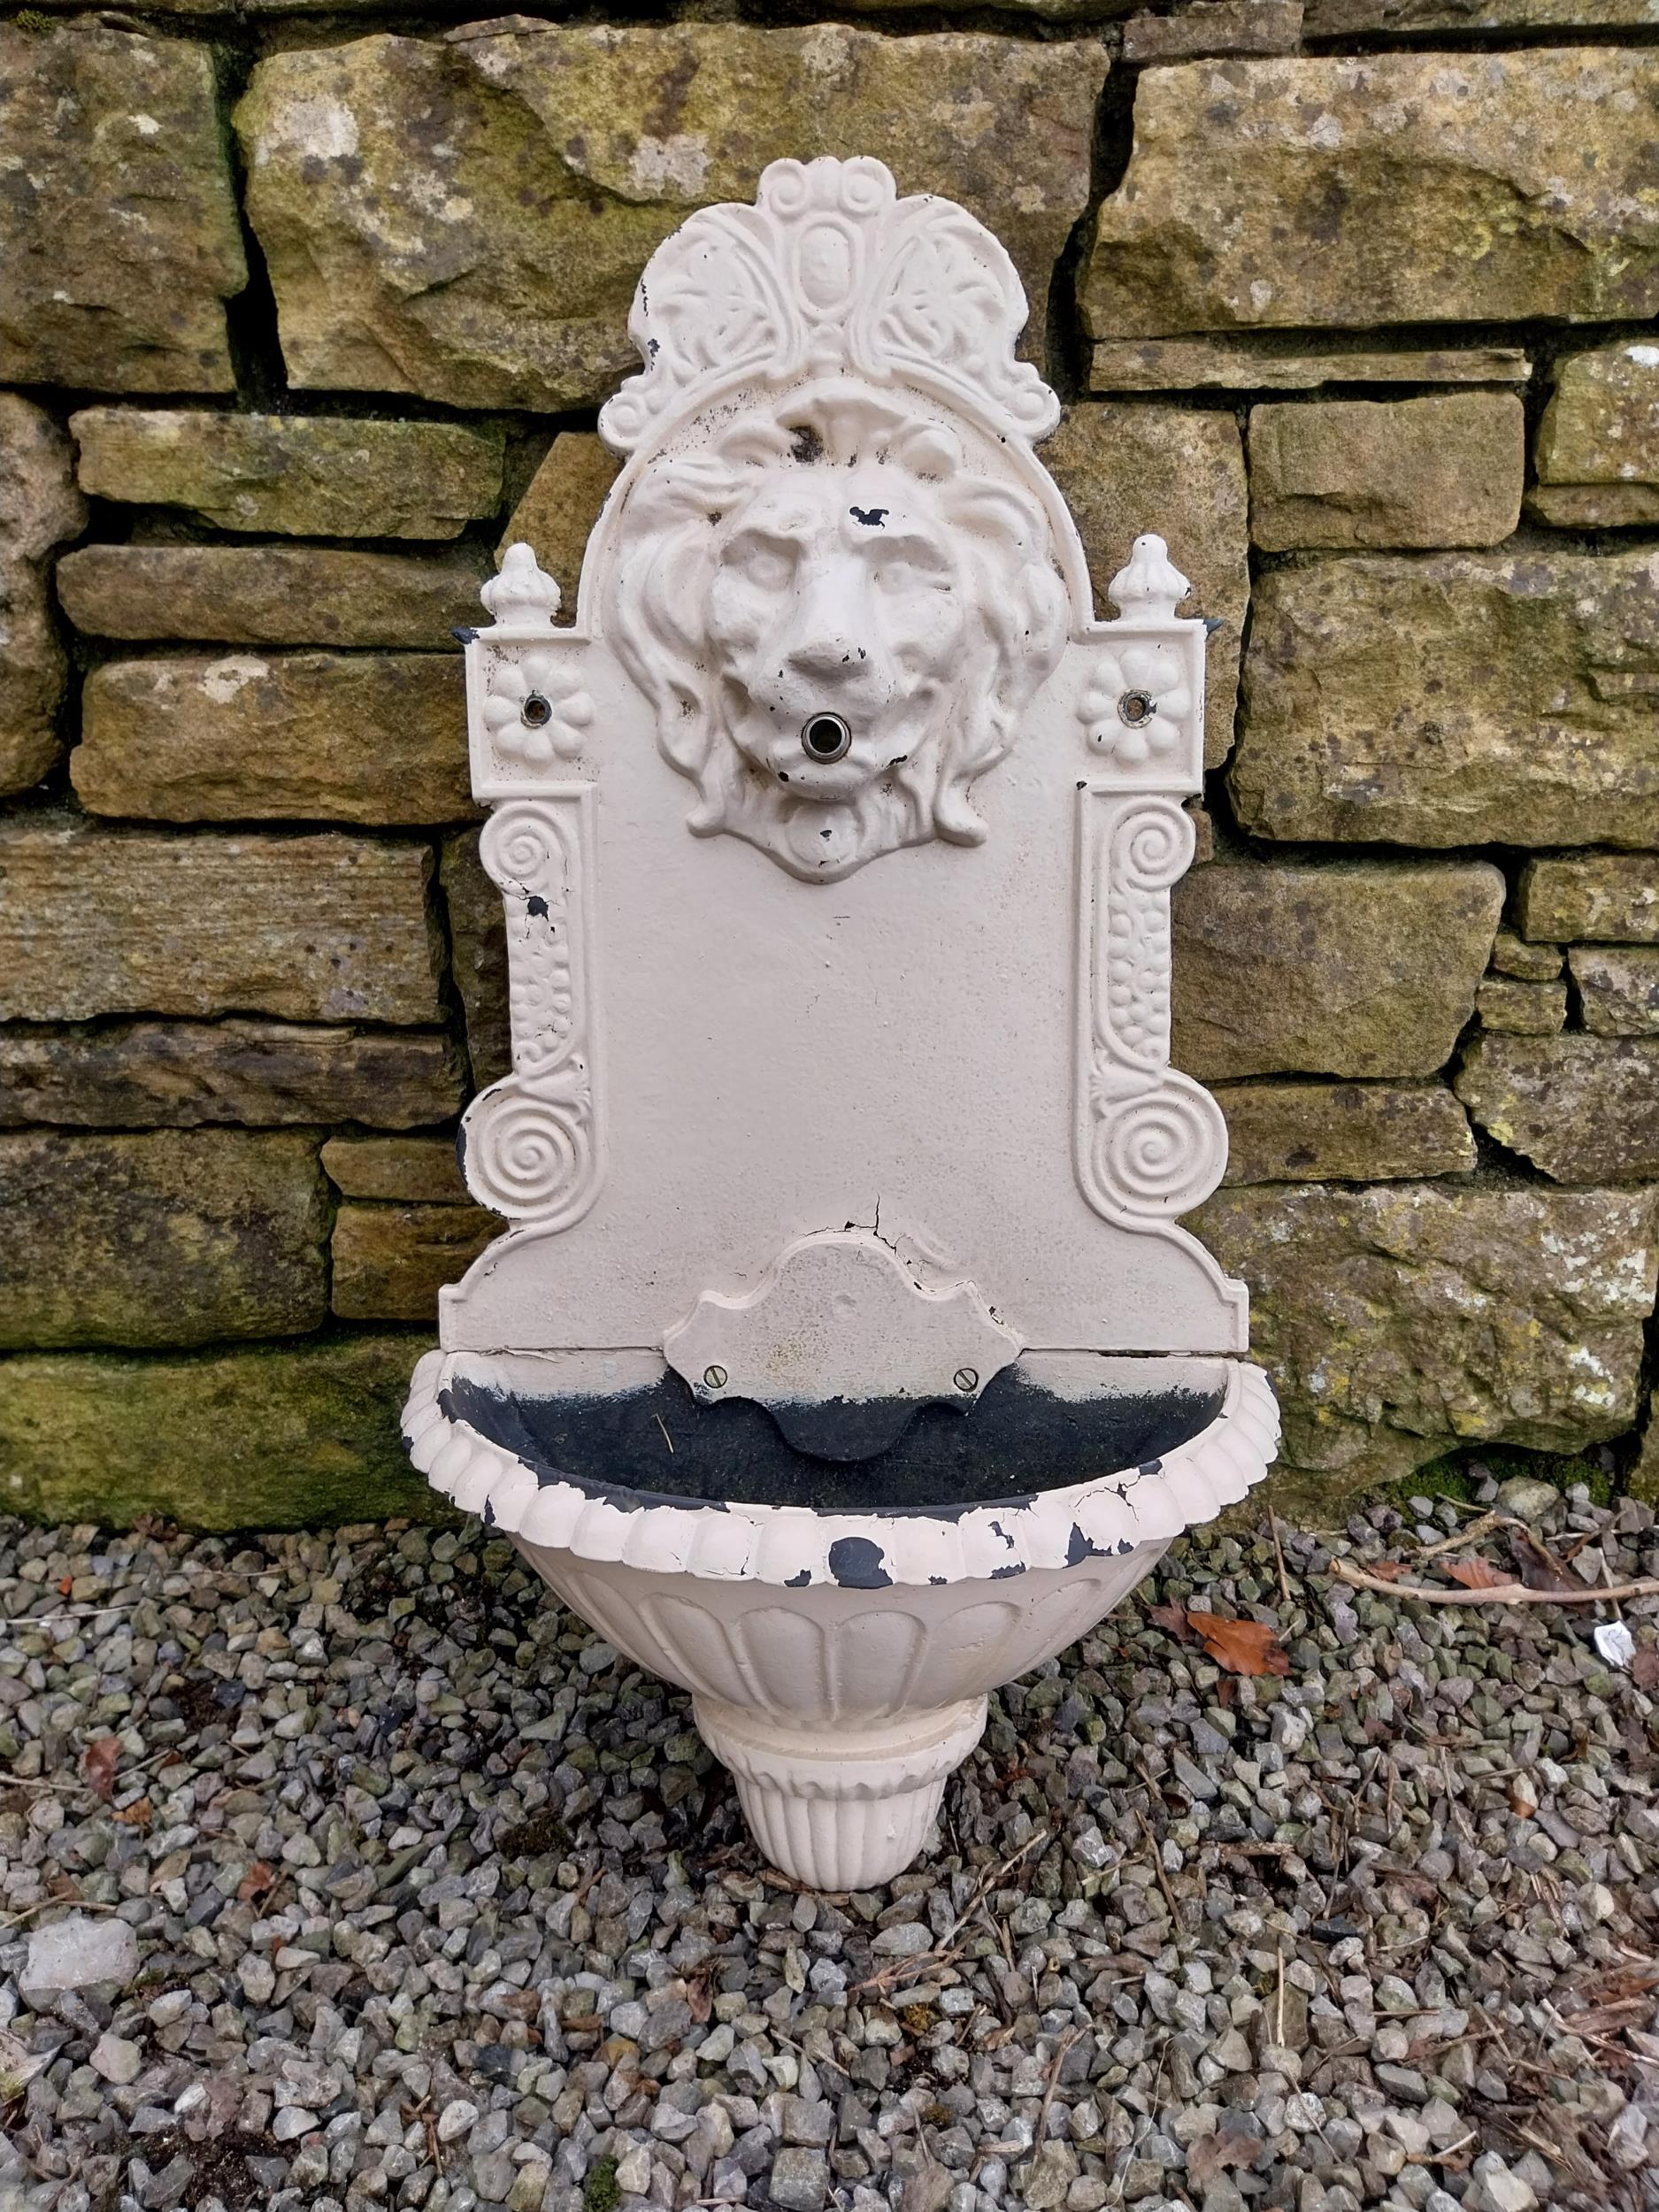 Good quality cast iron wall mounted water feature decorated with Lions mask {80 cm H x 41 cm W x